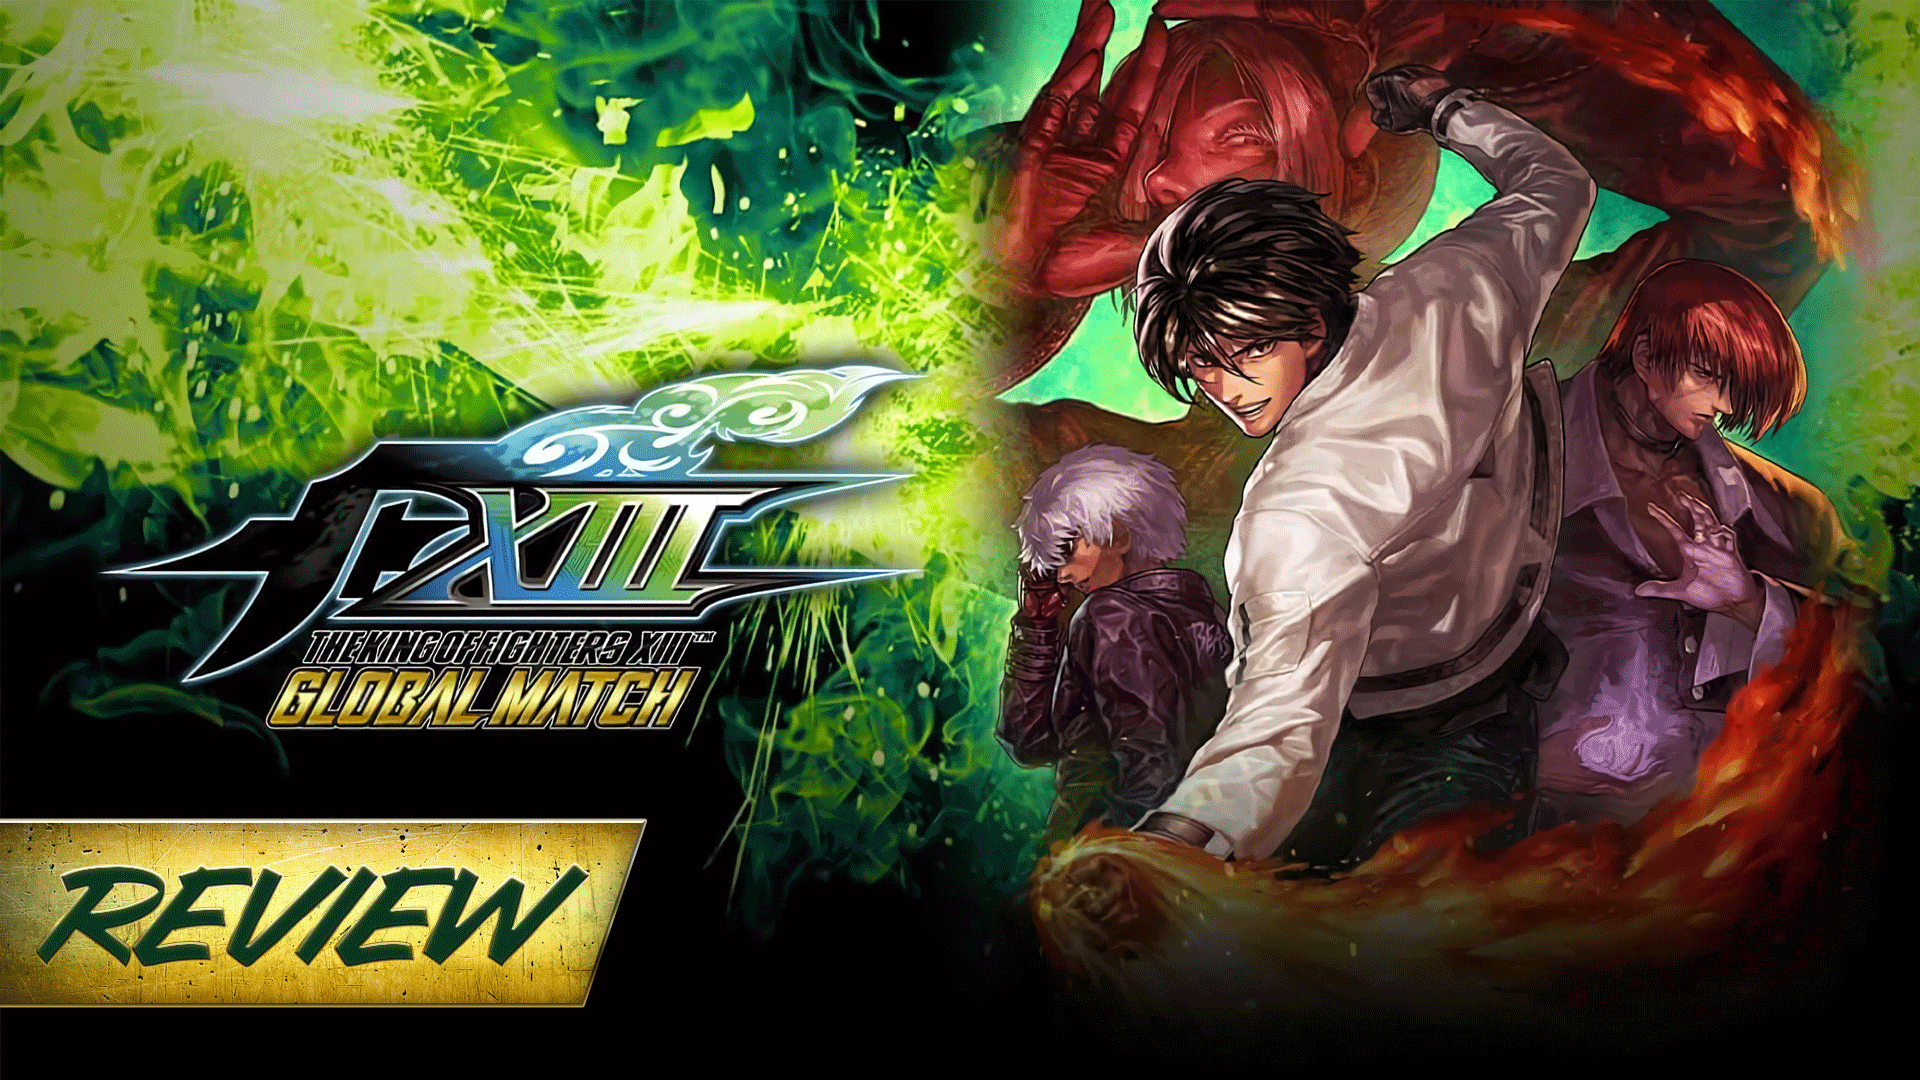 KoF XIII Global Match Review: The Beautiful, Ugly Duckling